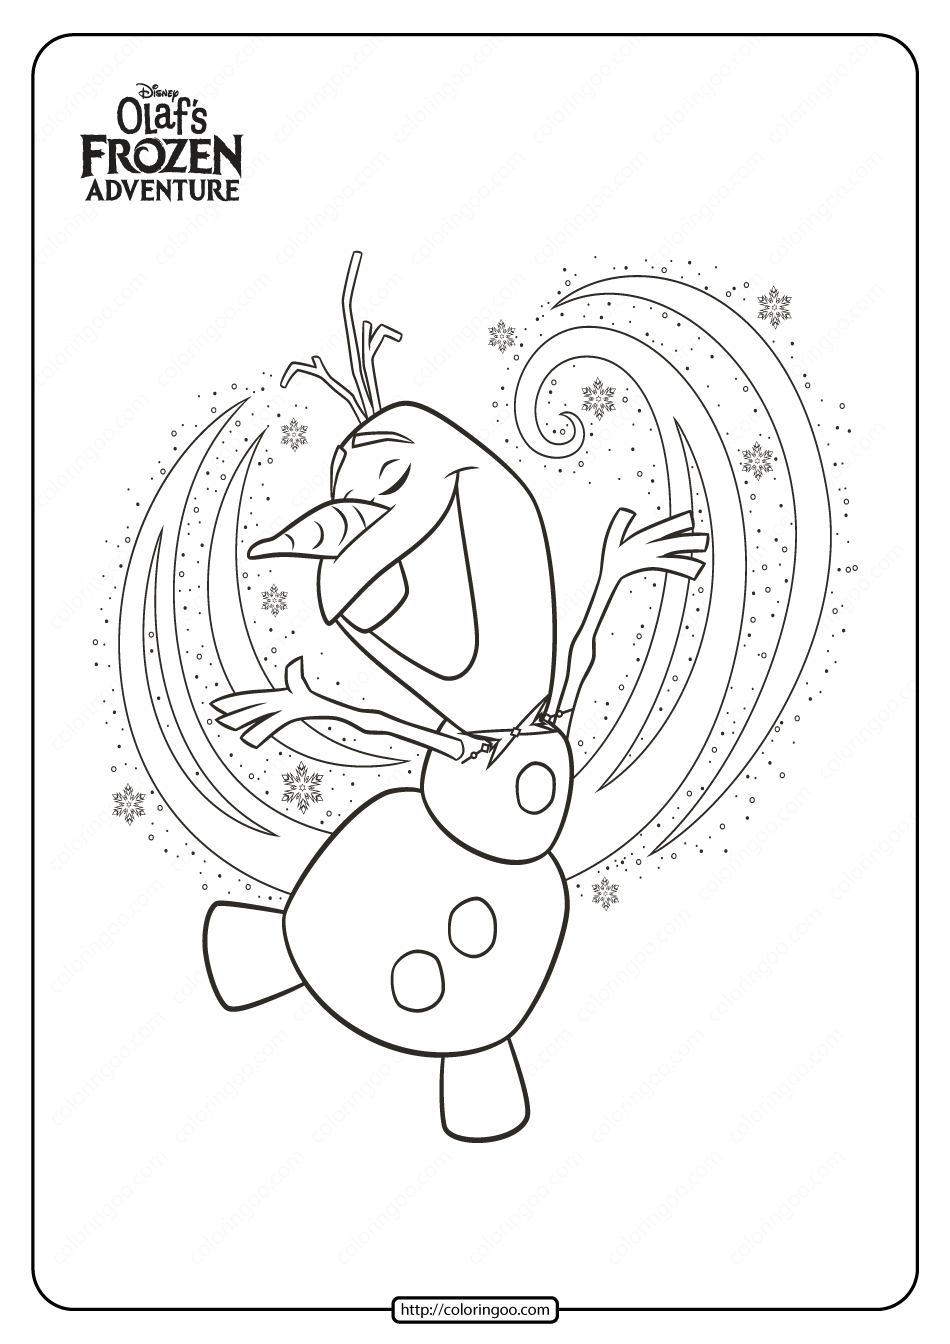 Disney Olaf’s Frozen Adventure Coloring Pages 02